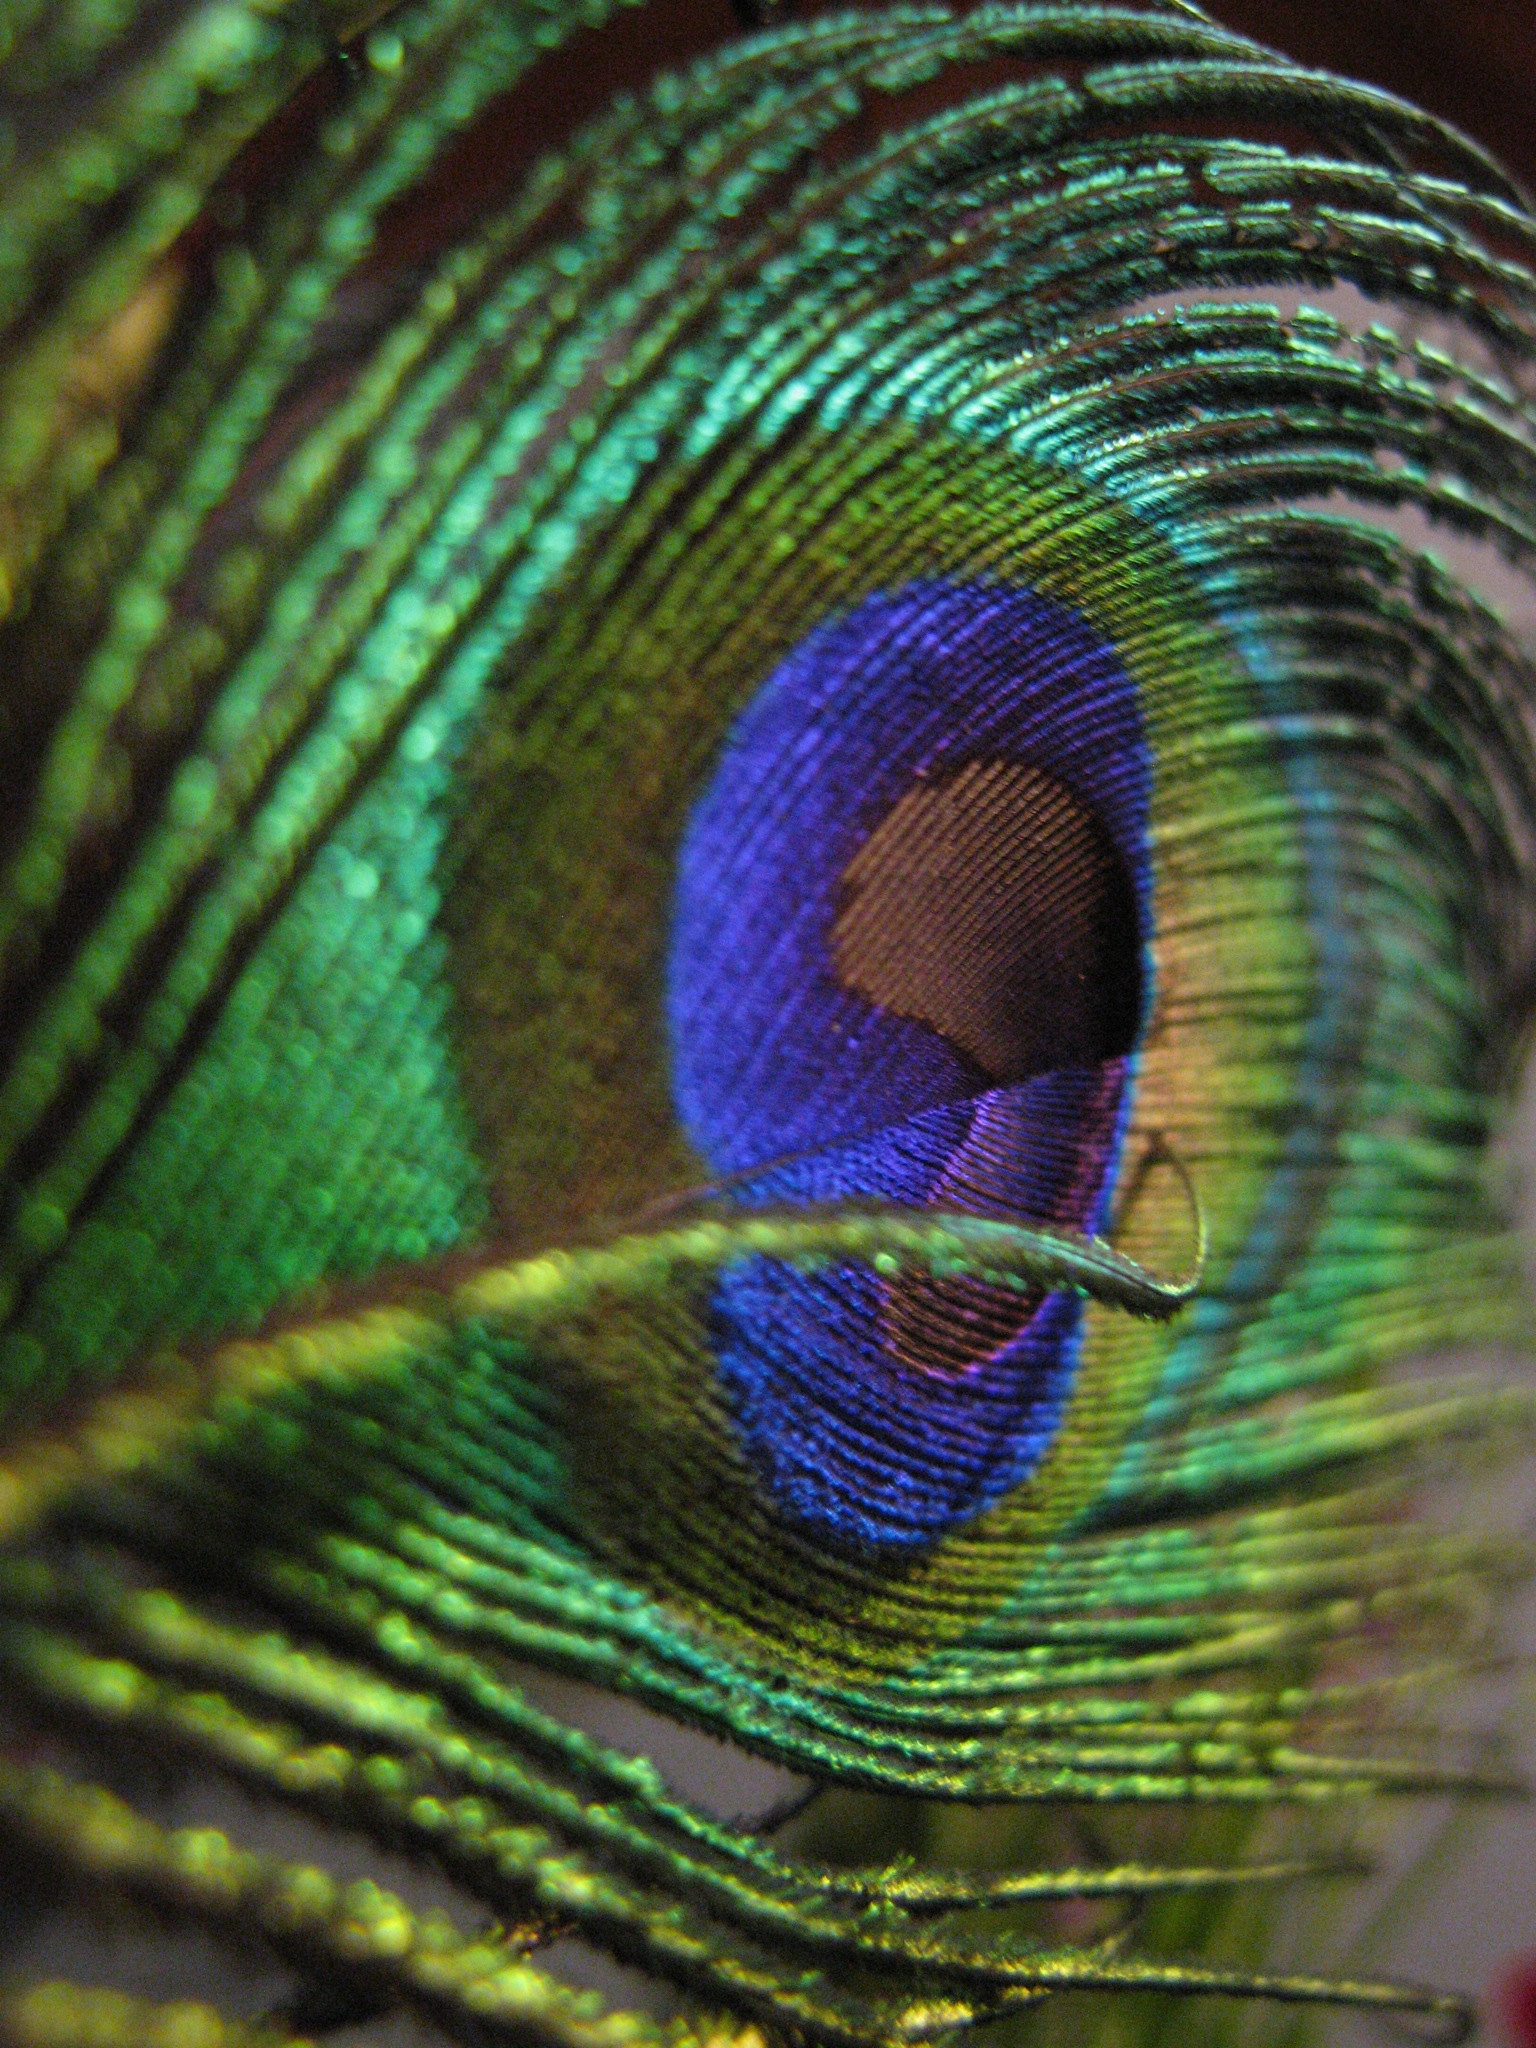 a closeup view of a peacock feather